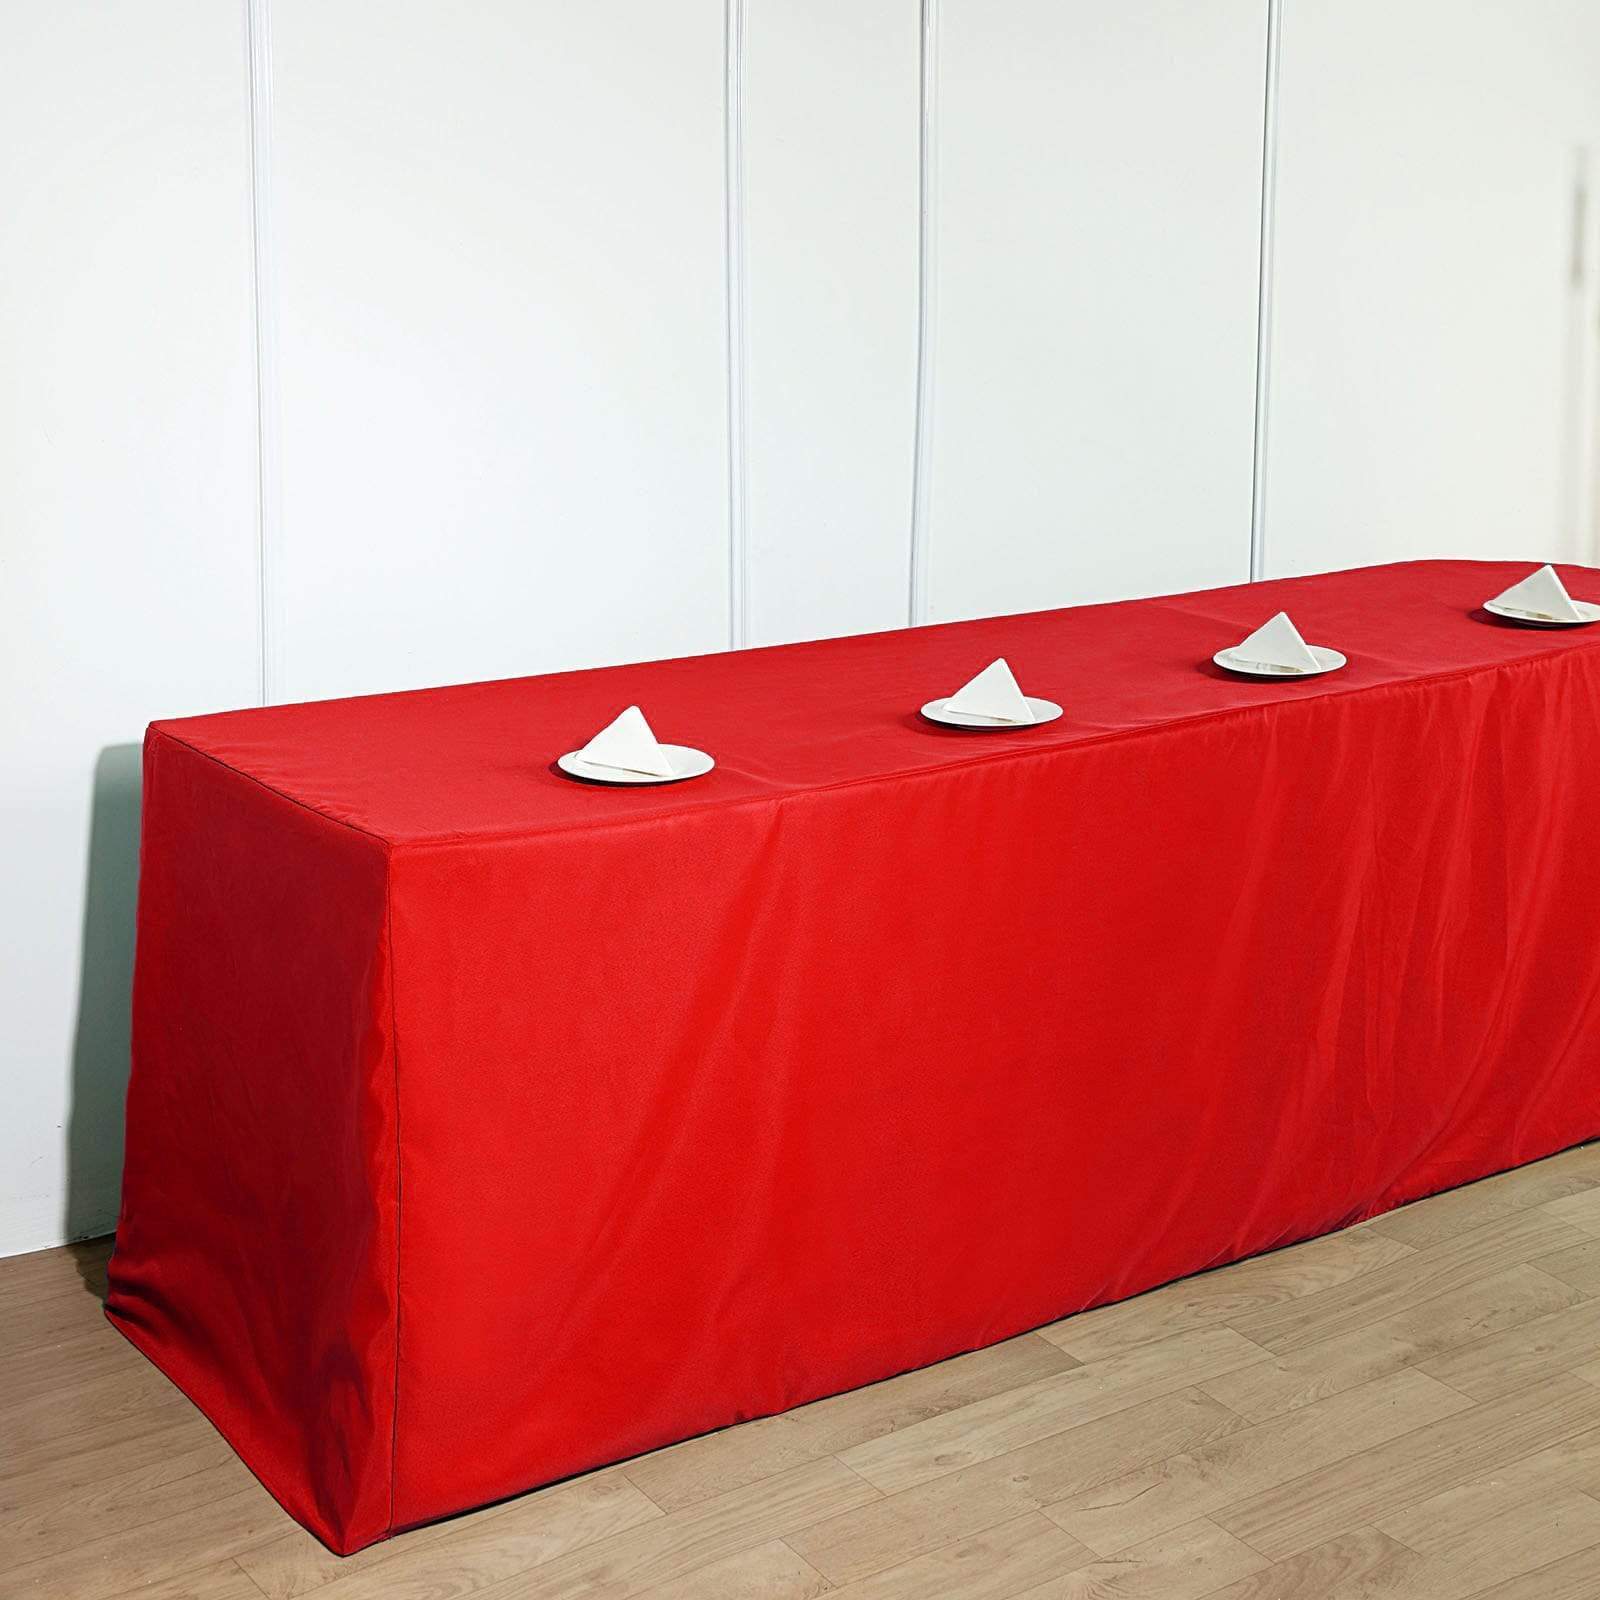 8 feet Fitted Polyester Rectangular Tablecloth